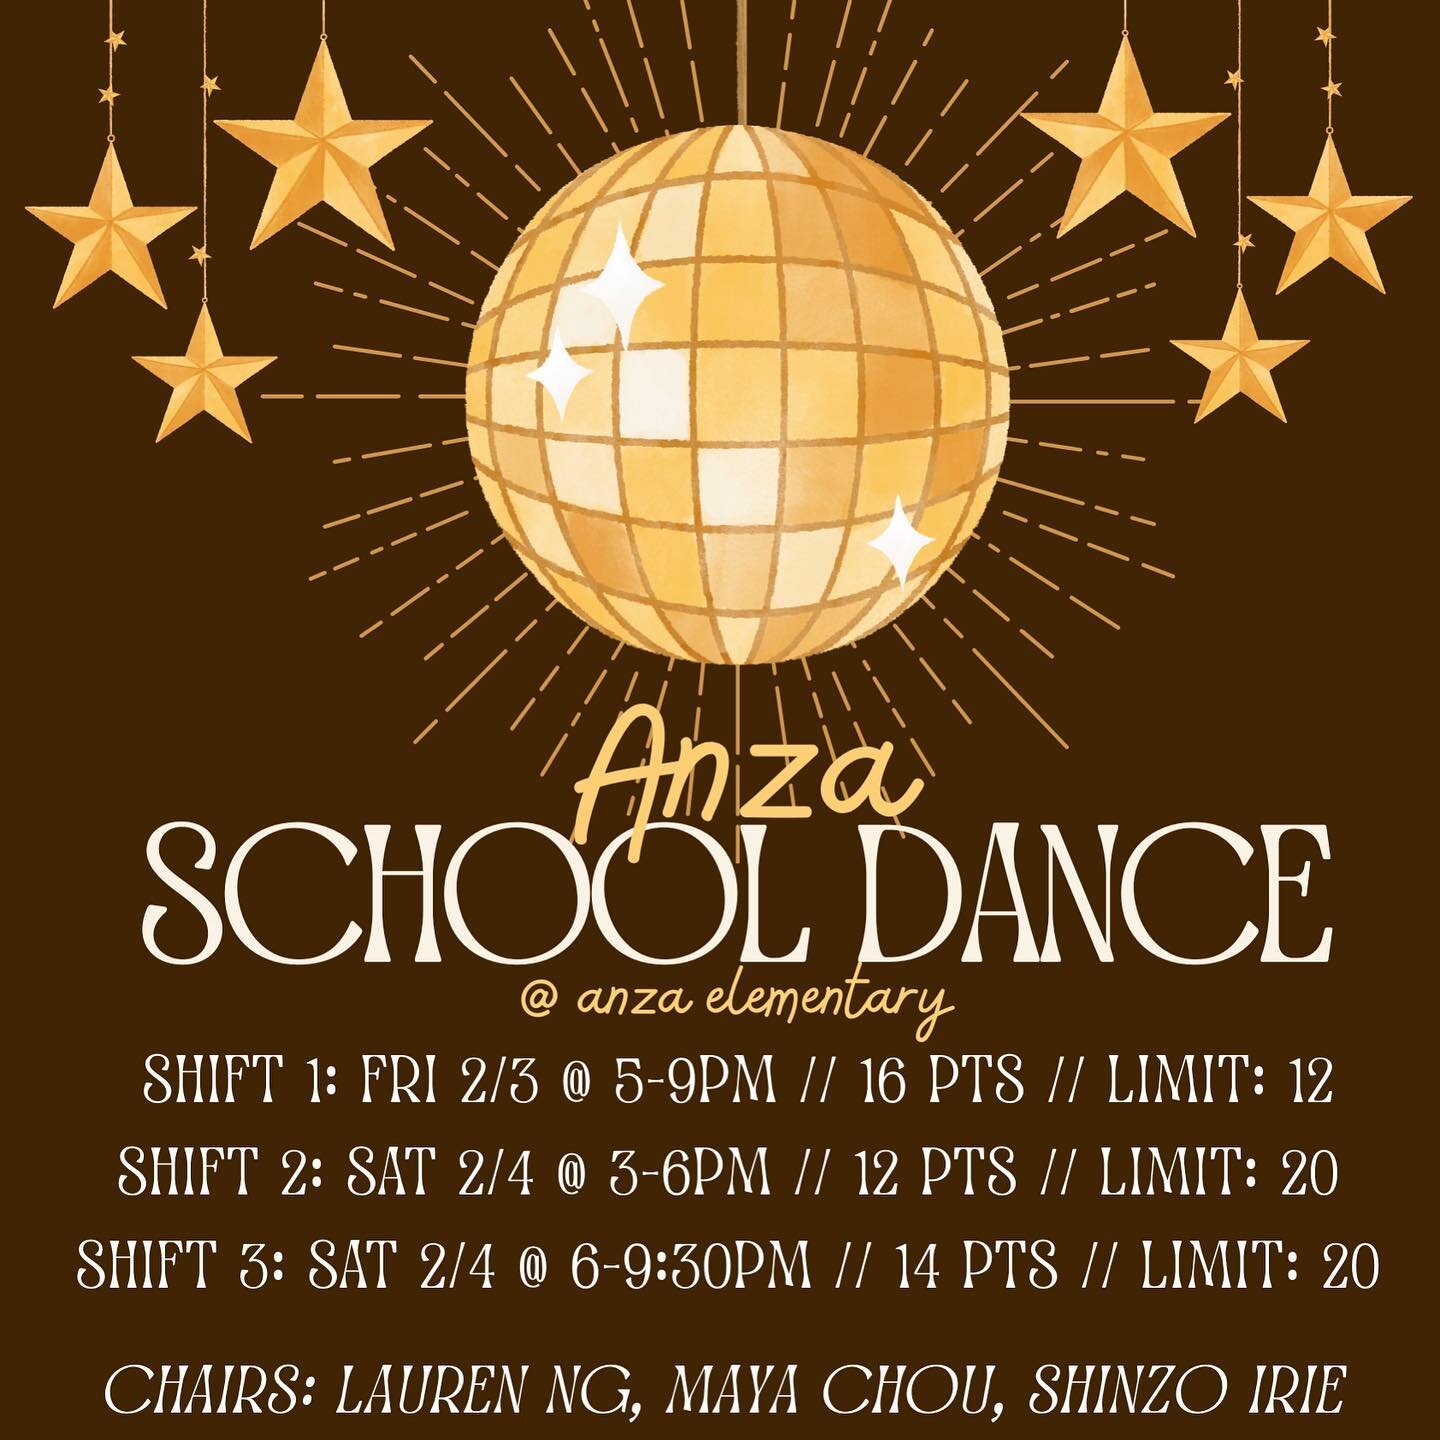 Help set up for the Anza school dance (shift 1/2) or help run the dance (shift 3). Sign up for this event at whscsf.org. These points will count towards second semester.